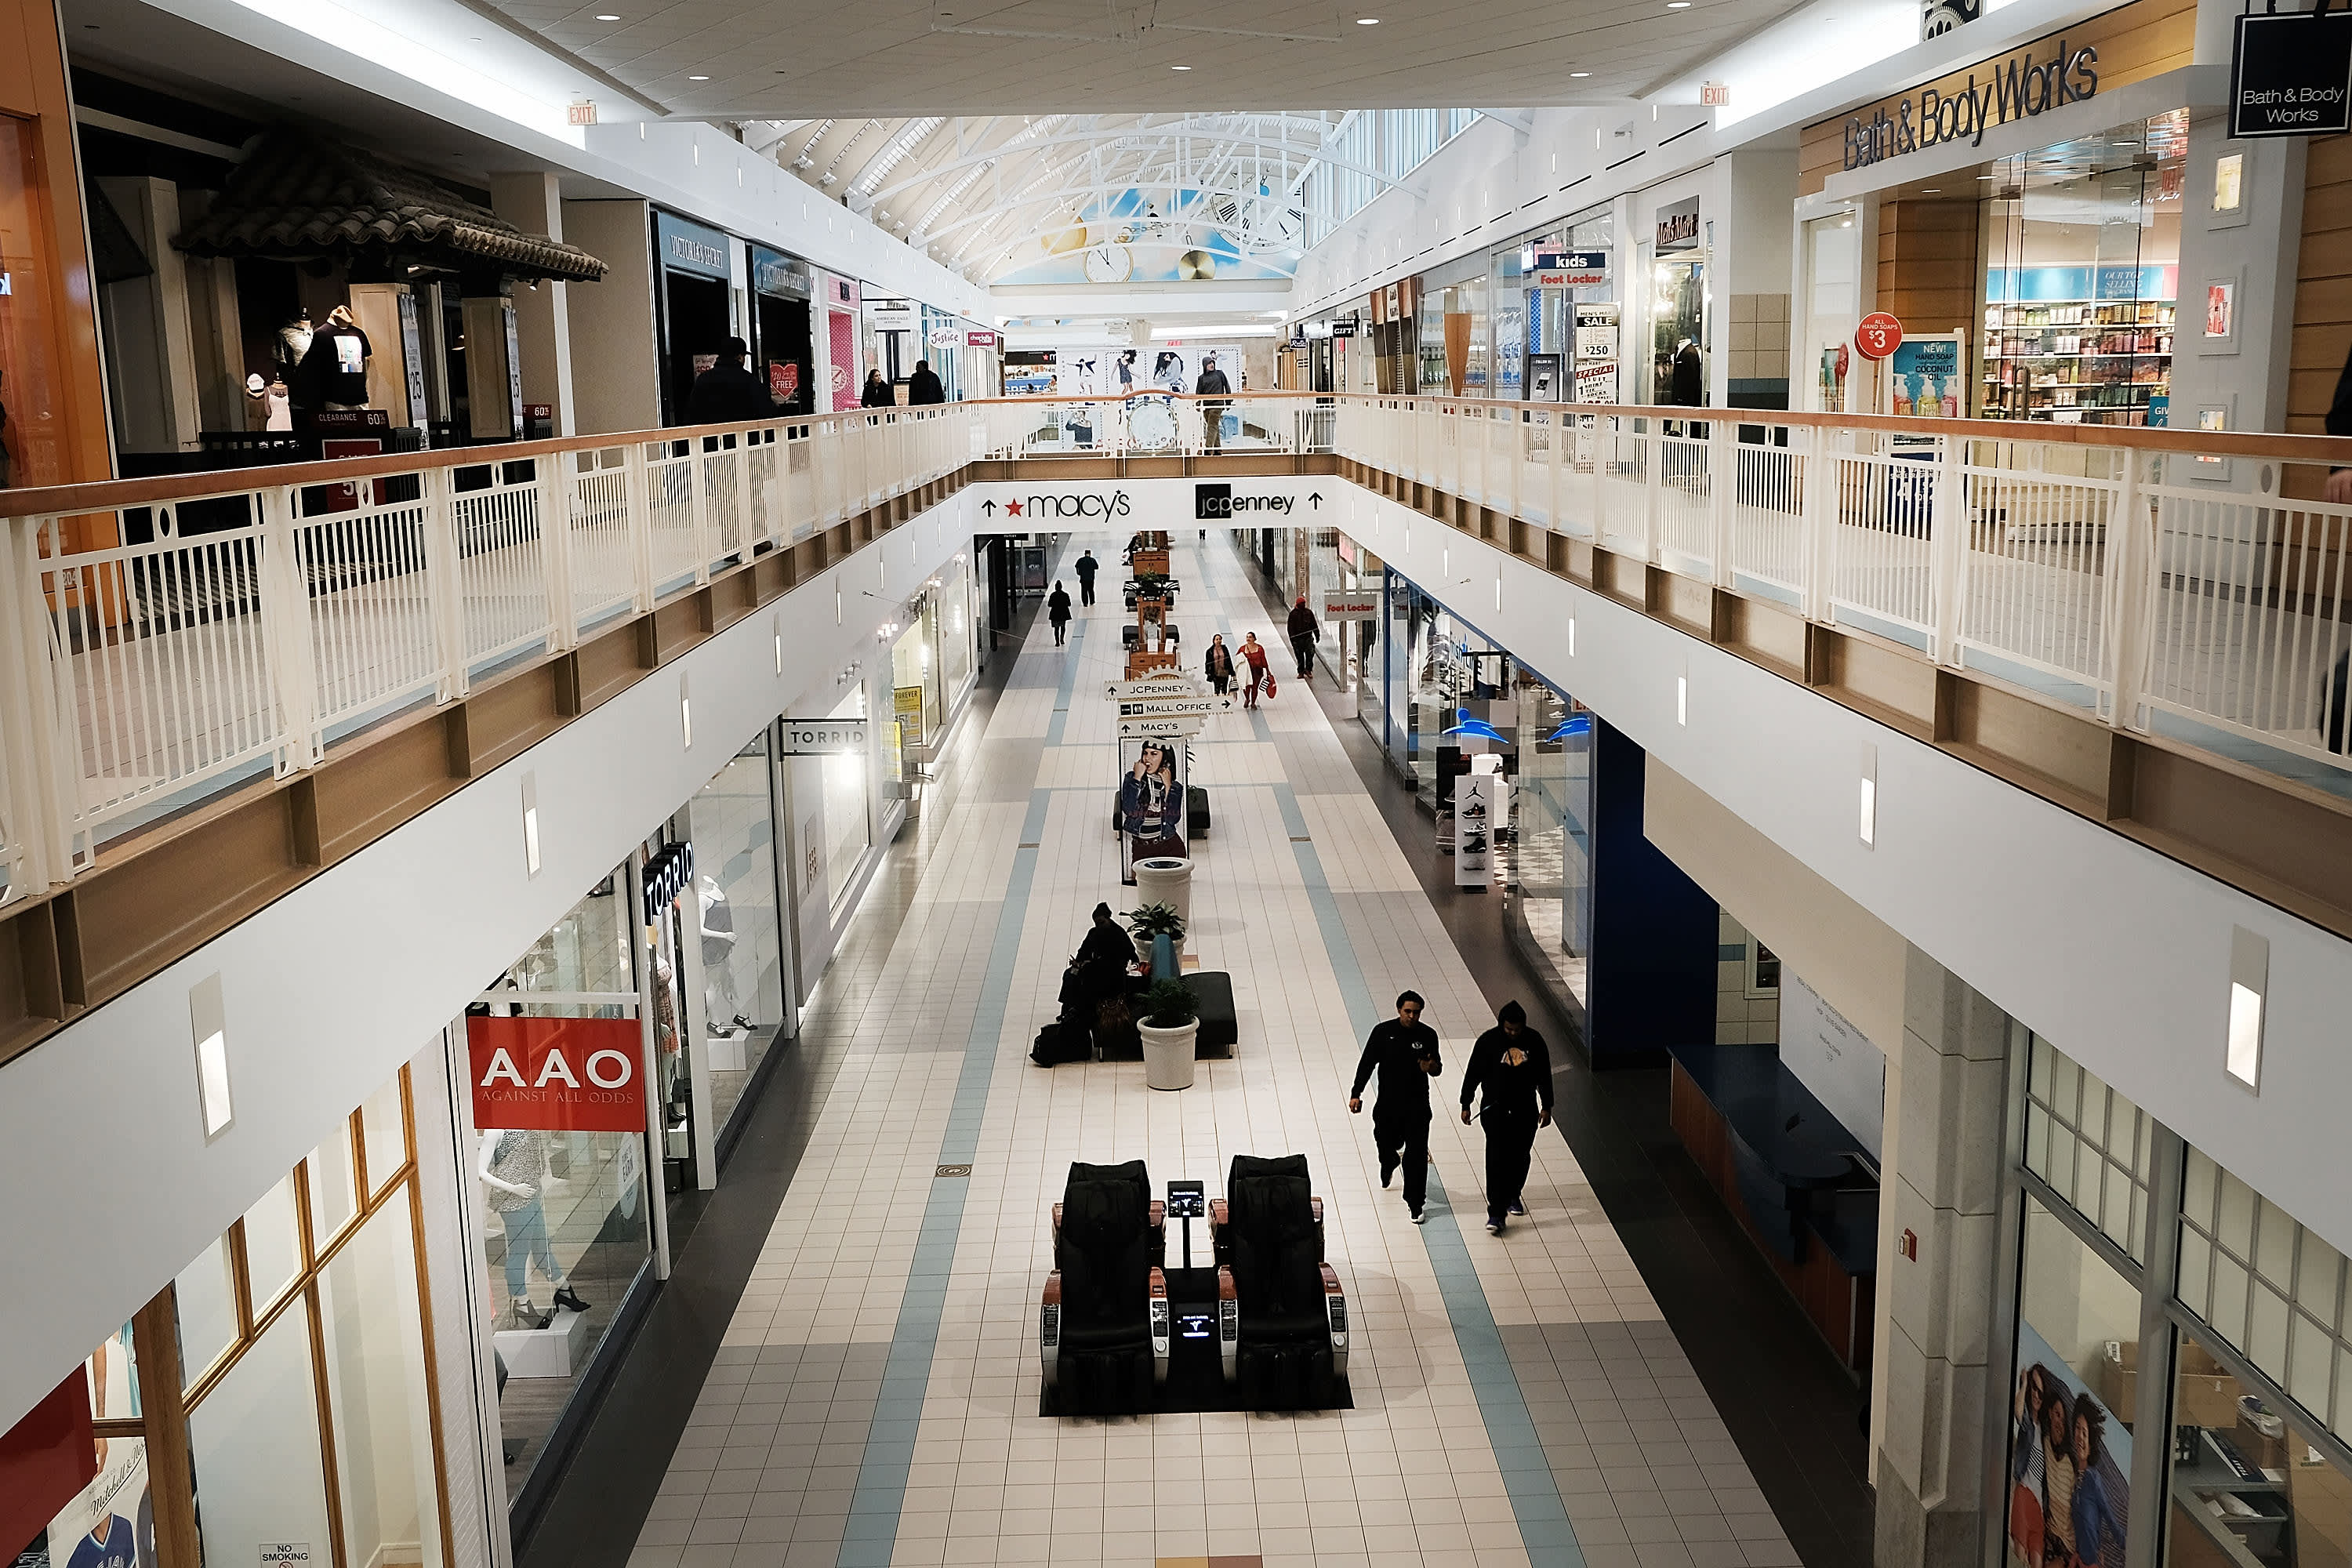 Mall owners fight back against 'scythe-wielding grim reaper of bankruptcy